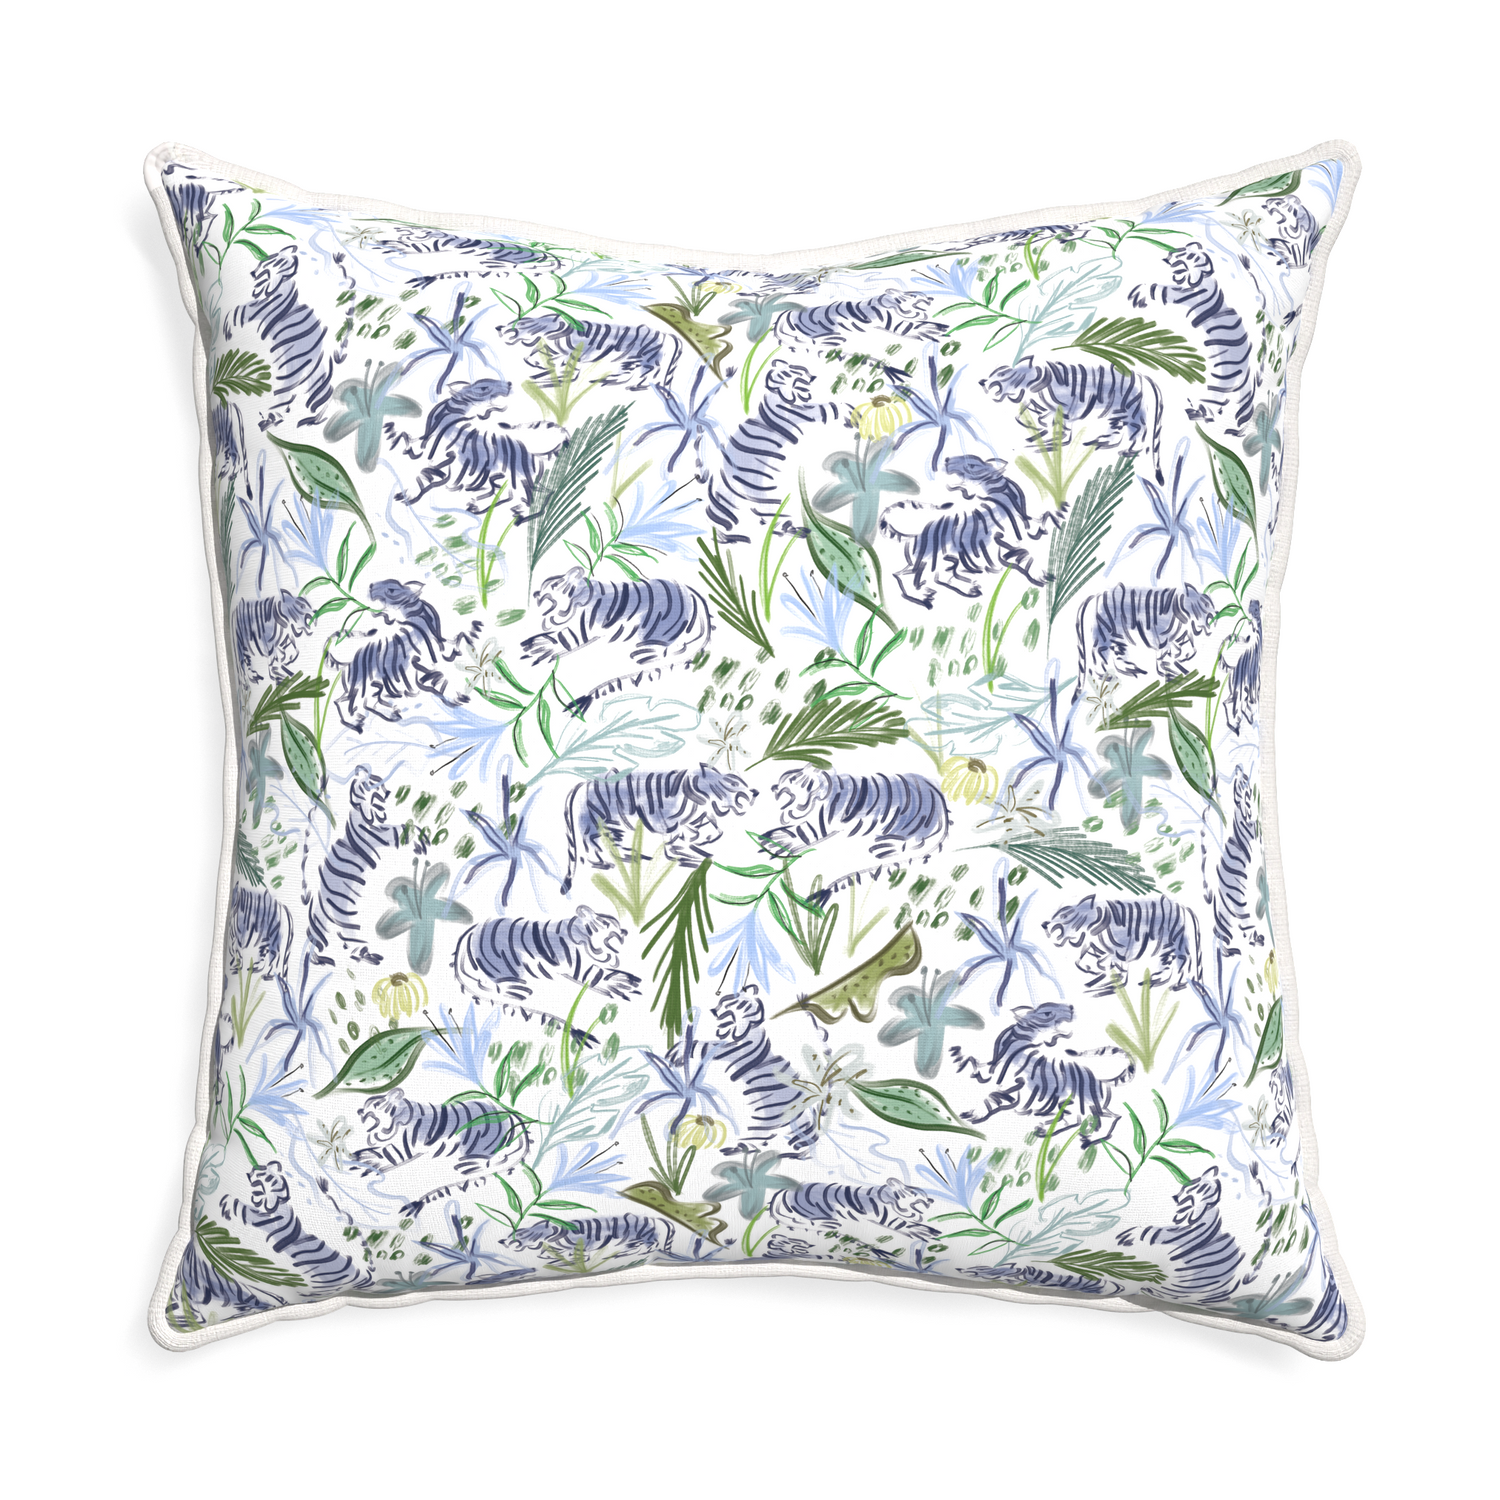 Euro-sham frida green custom pillow with snow piping on white background